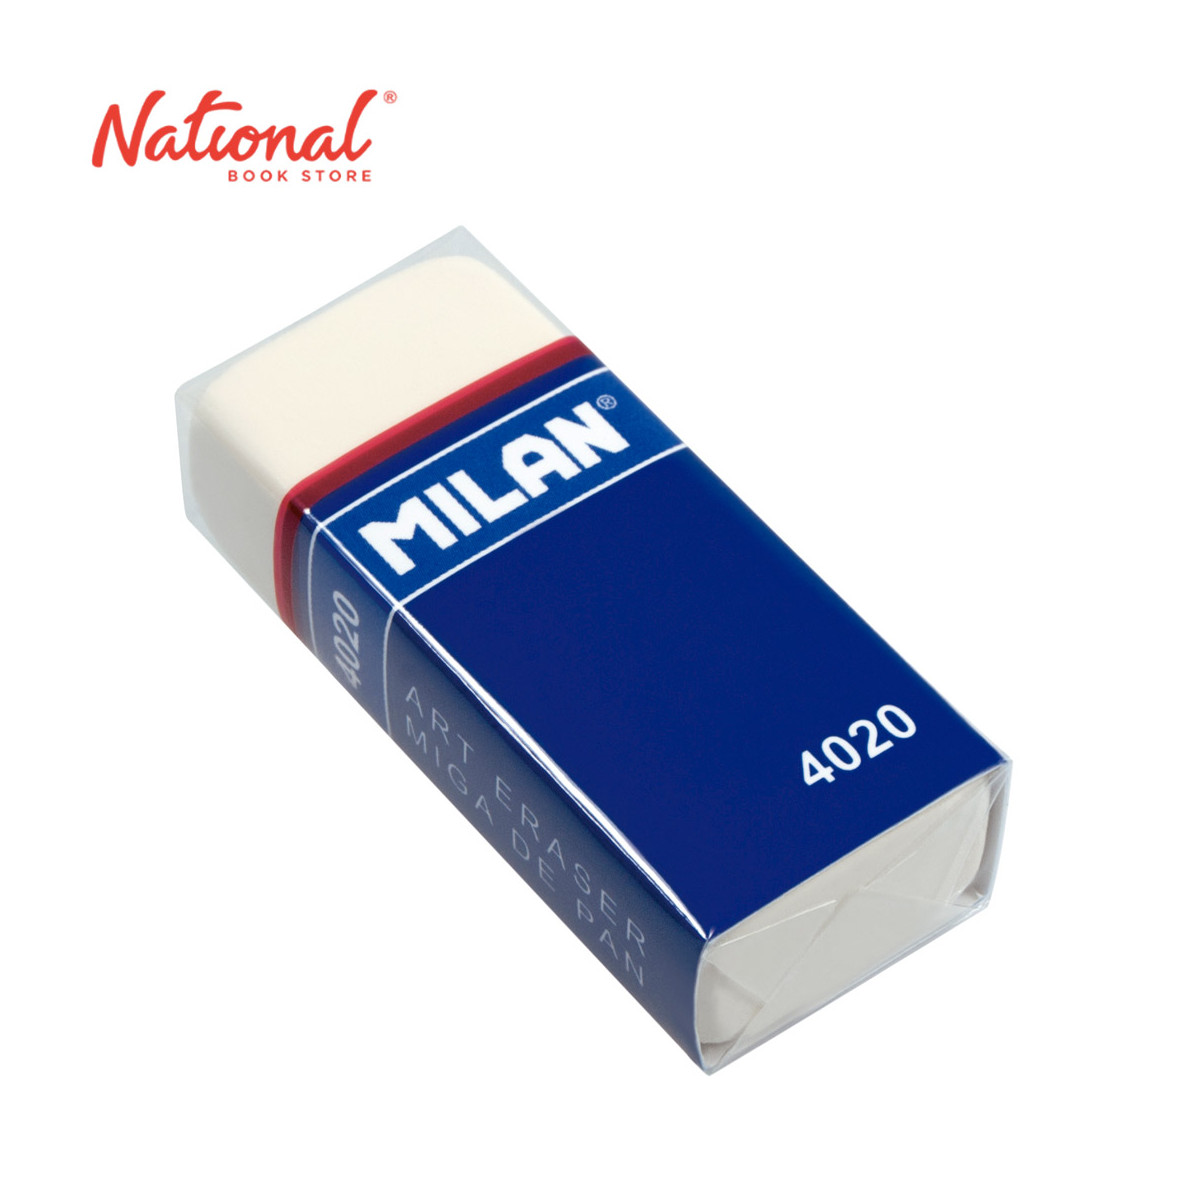 Milan Rubber Eraser Synthetic with Carton Sleeve White 4020 2's BMM9232 - School & Office Stationery